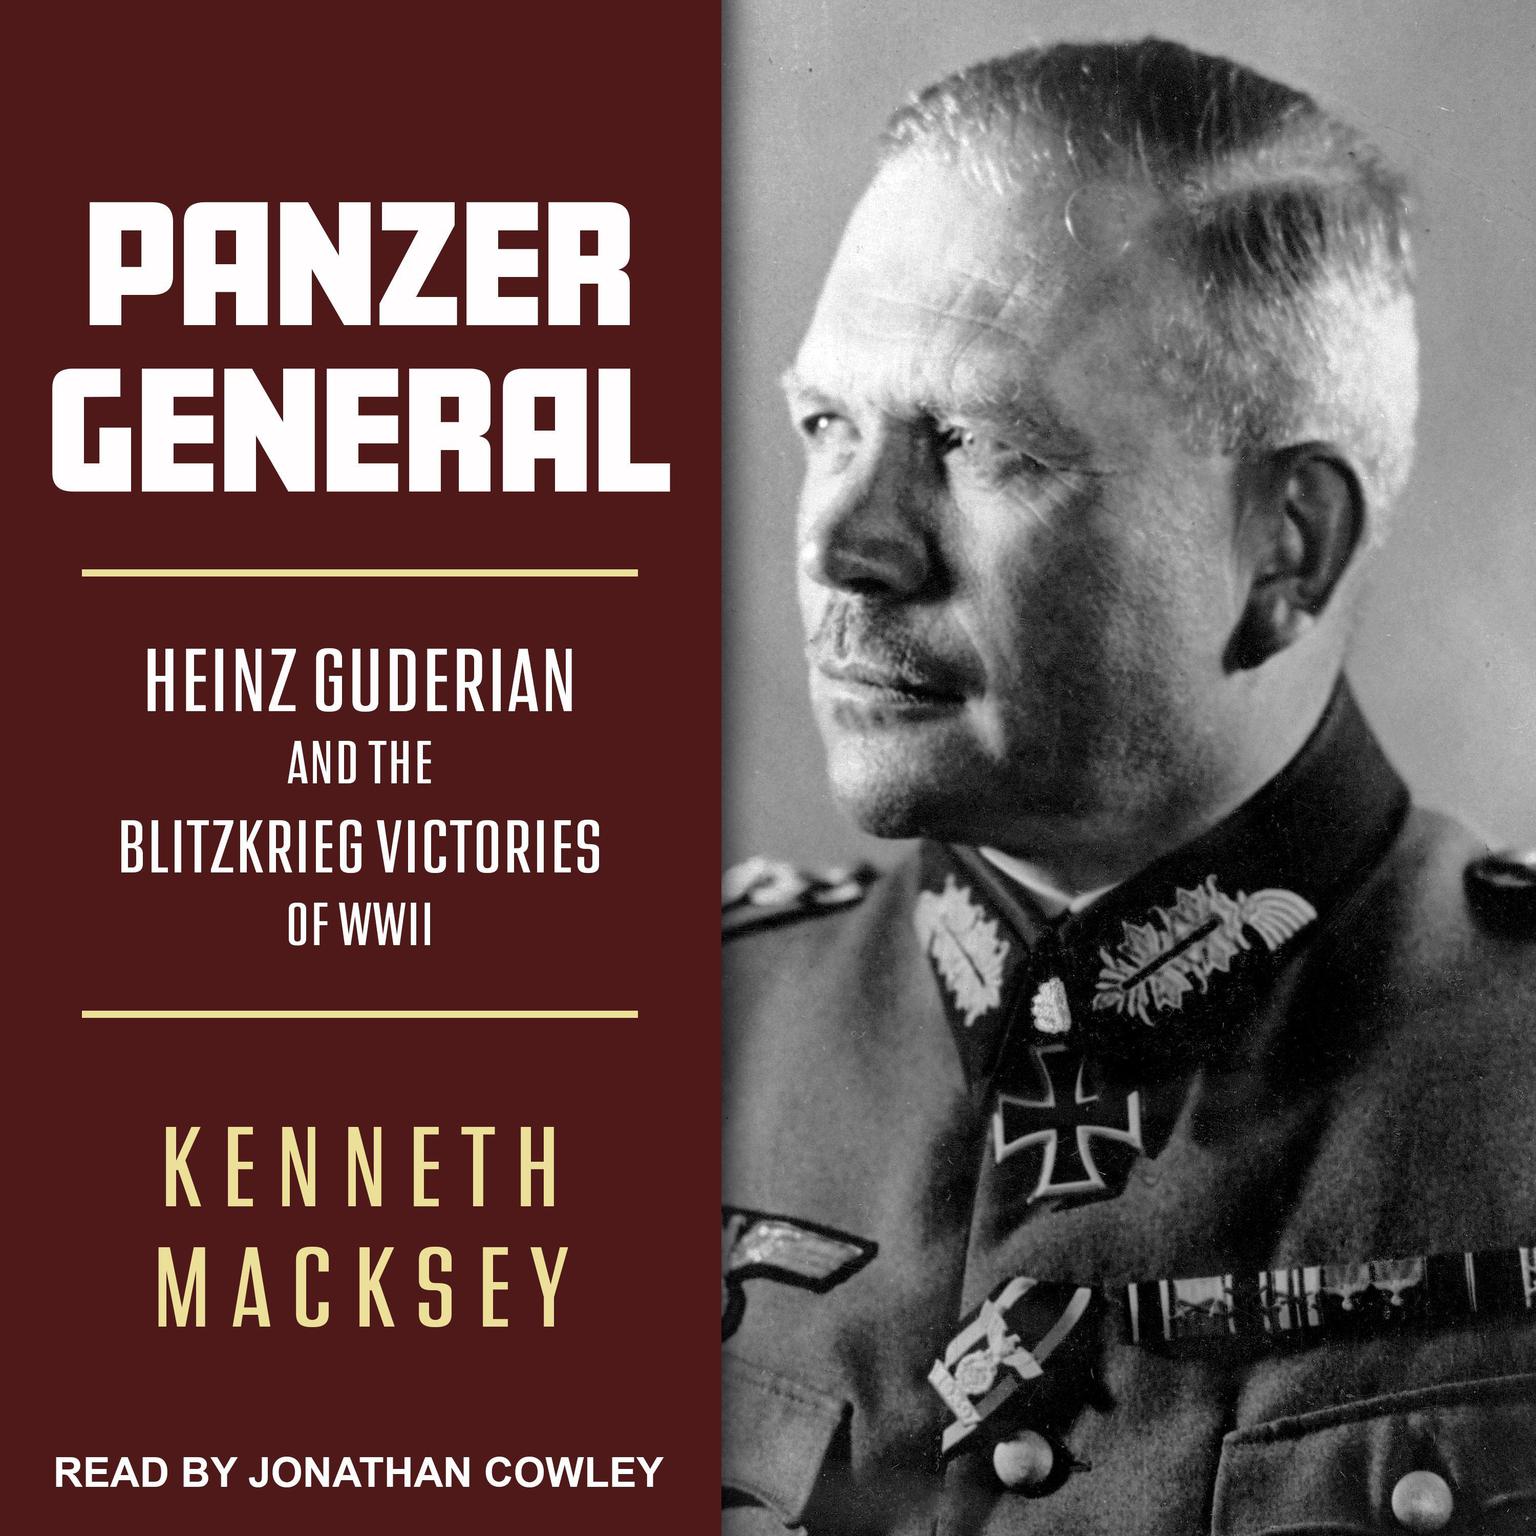 Panzer General: Heinz Guderian and the Blitzkrieg Victories of WWII Audiobook, by Kenneth Macksey